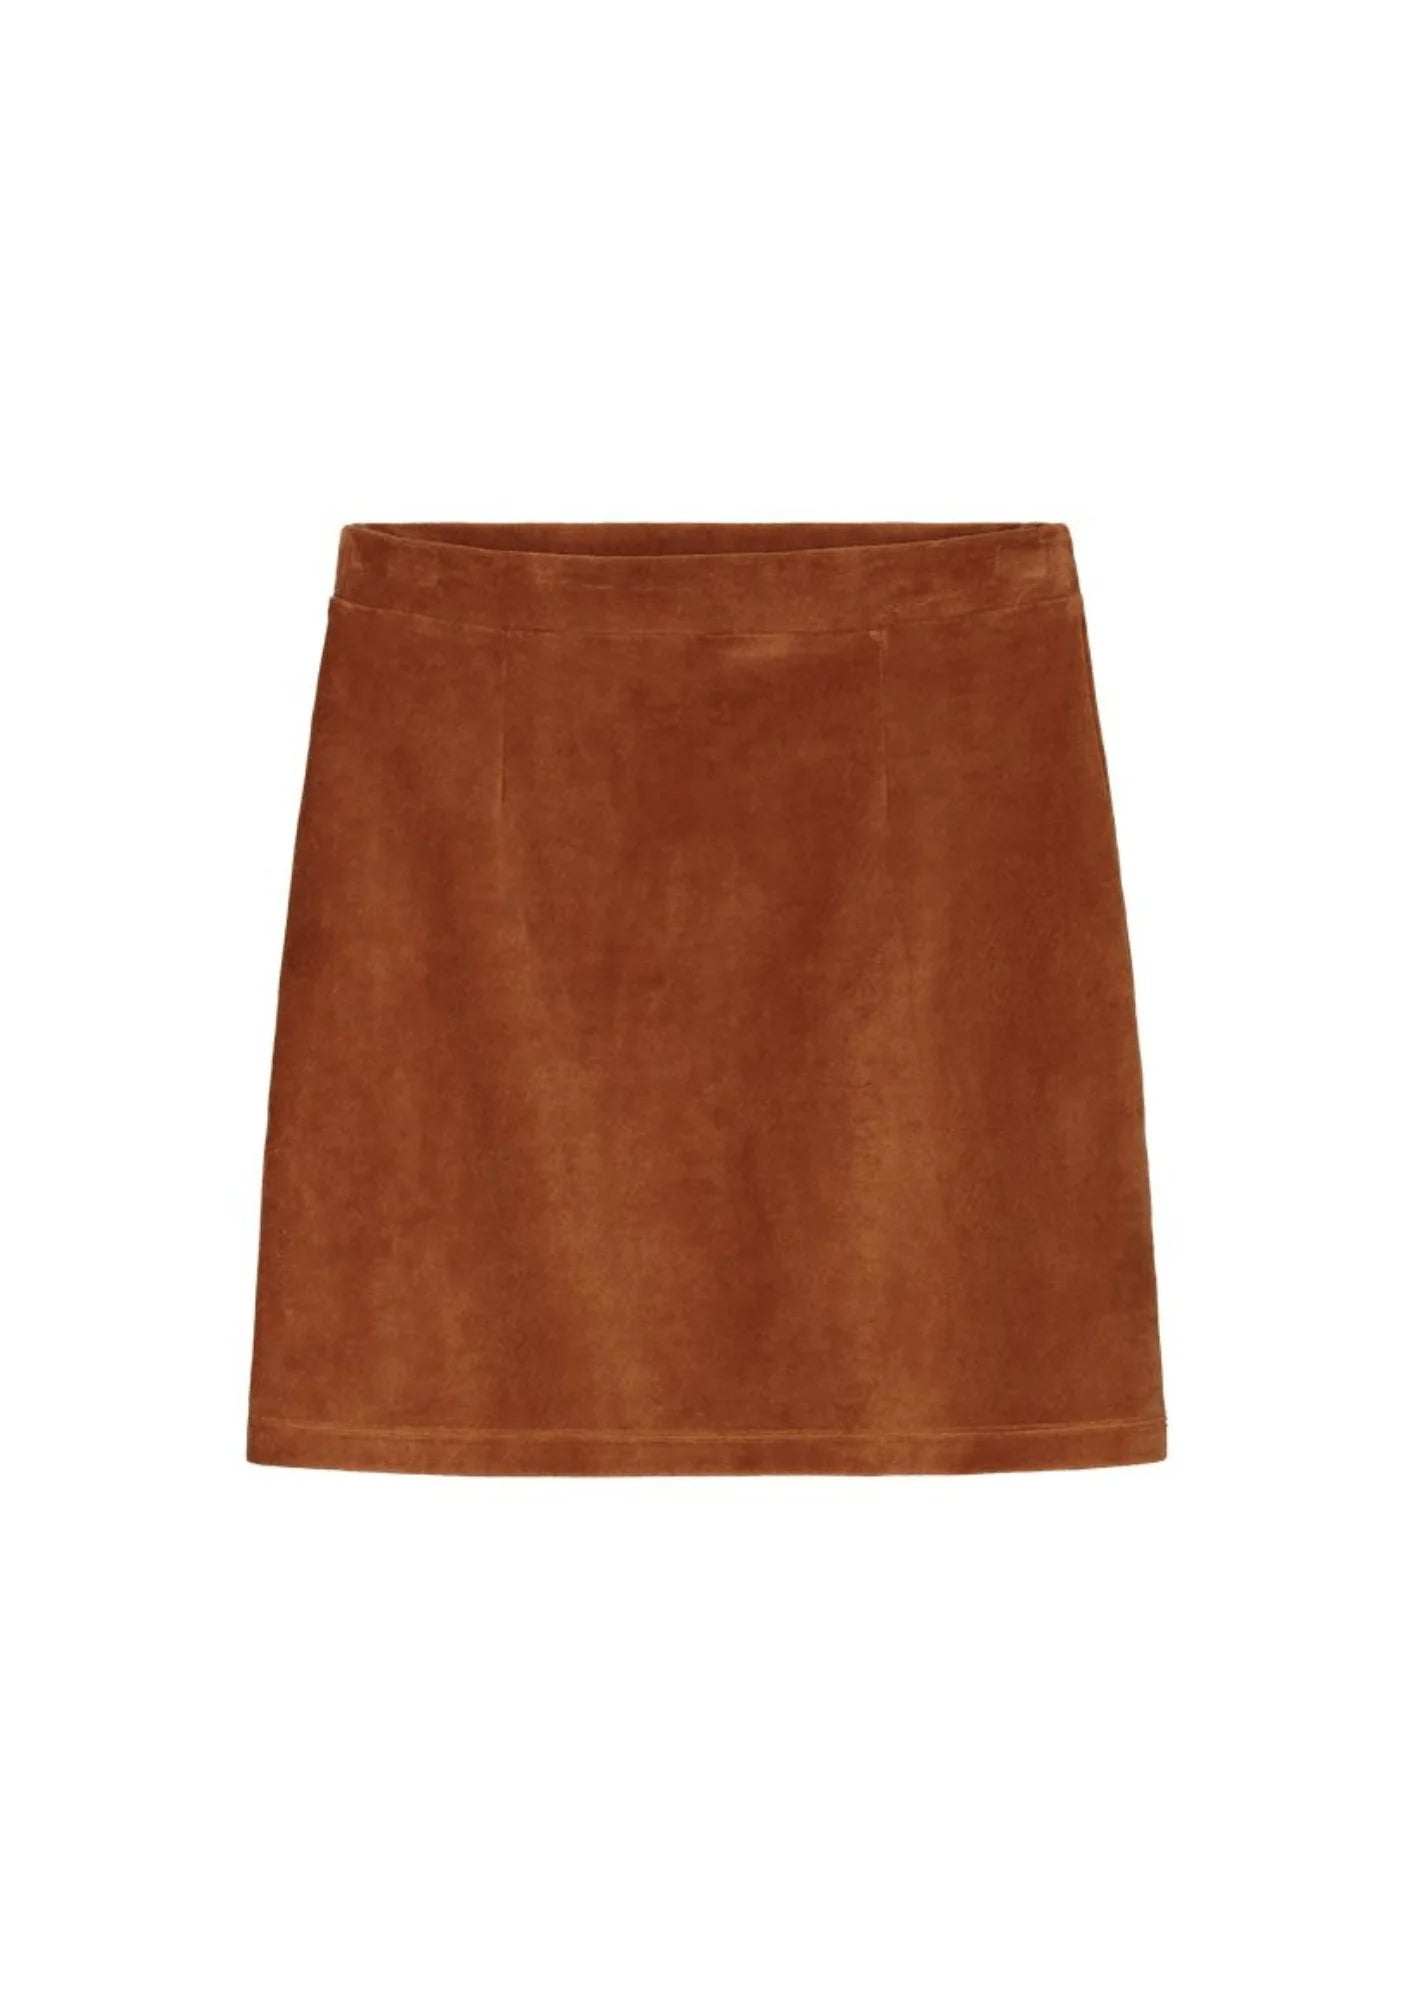 BROWN SUEDE A-LINE MINI SKIRT